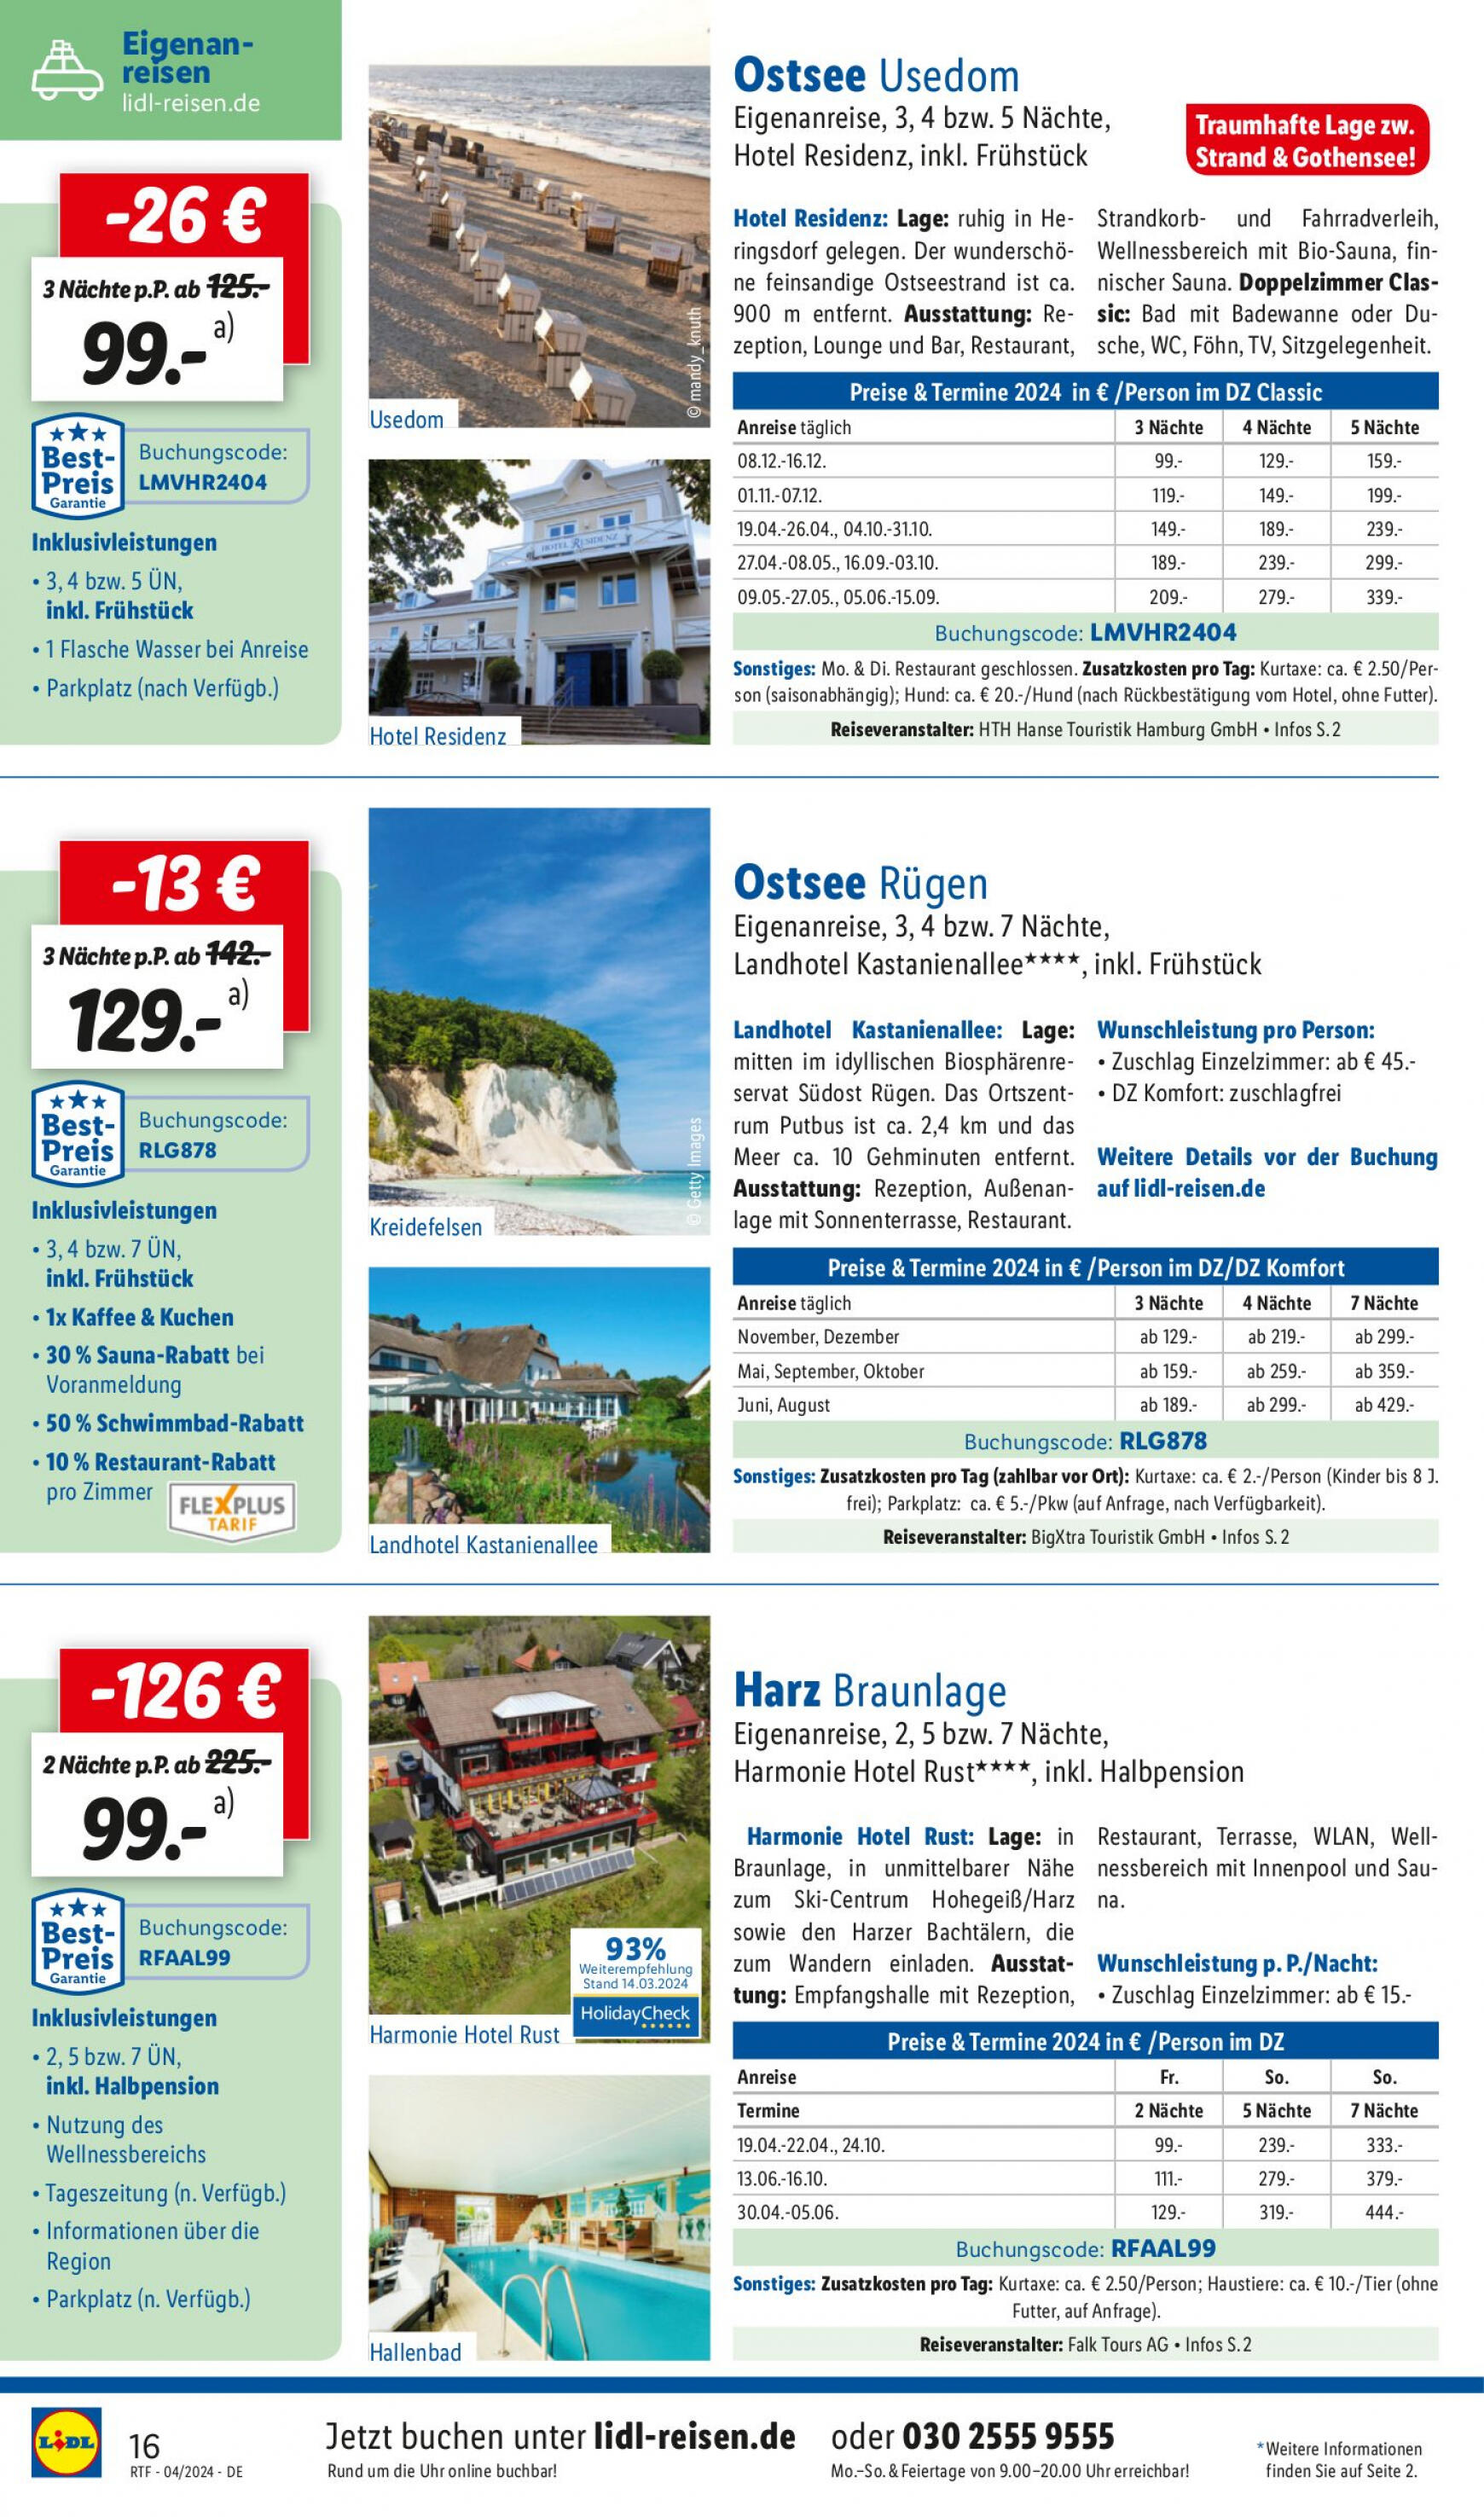 lidl - Flyer Lidl - Sommerschnäppchen aktuell 13.04. - 15.05. - page: 16